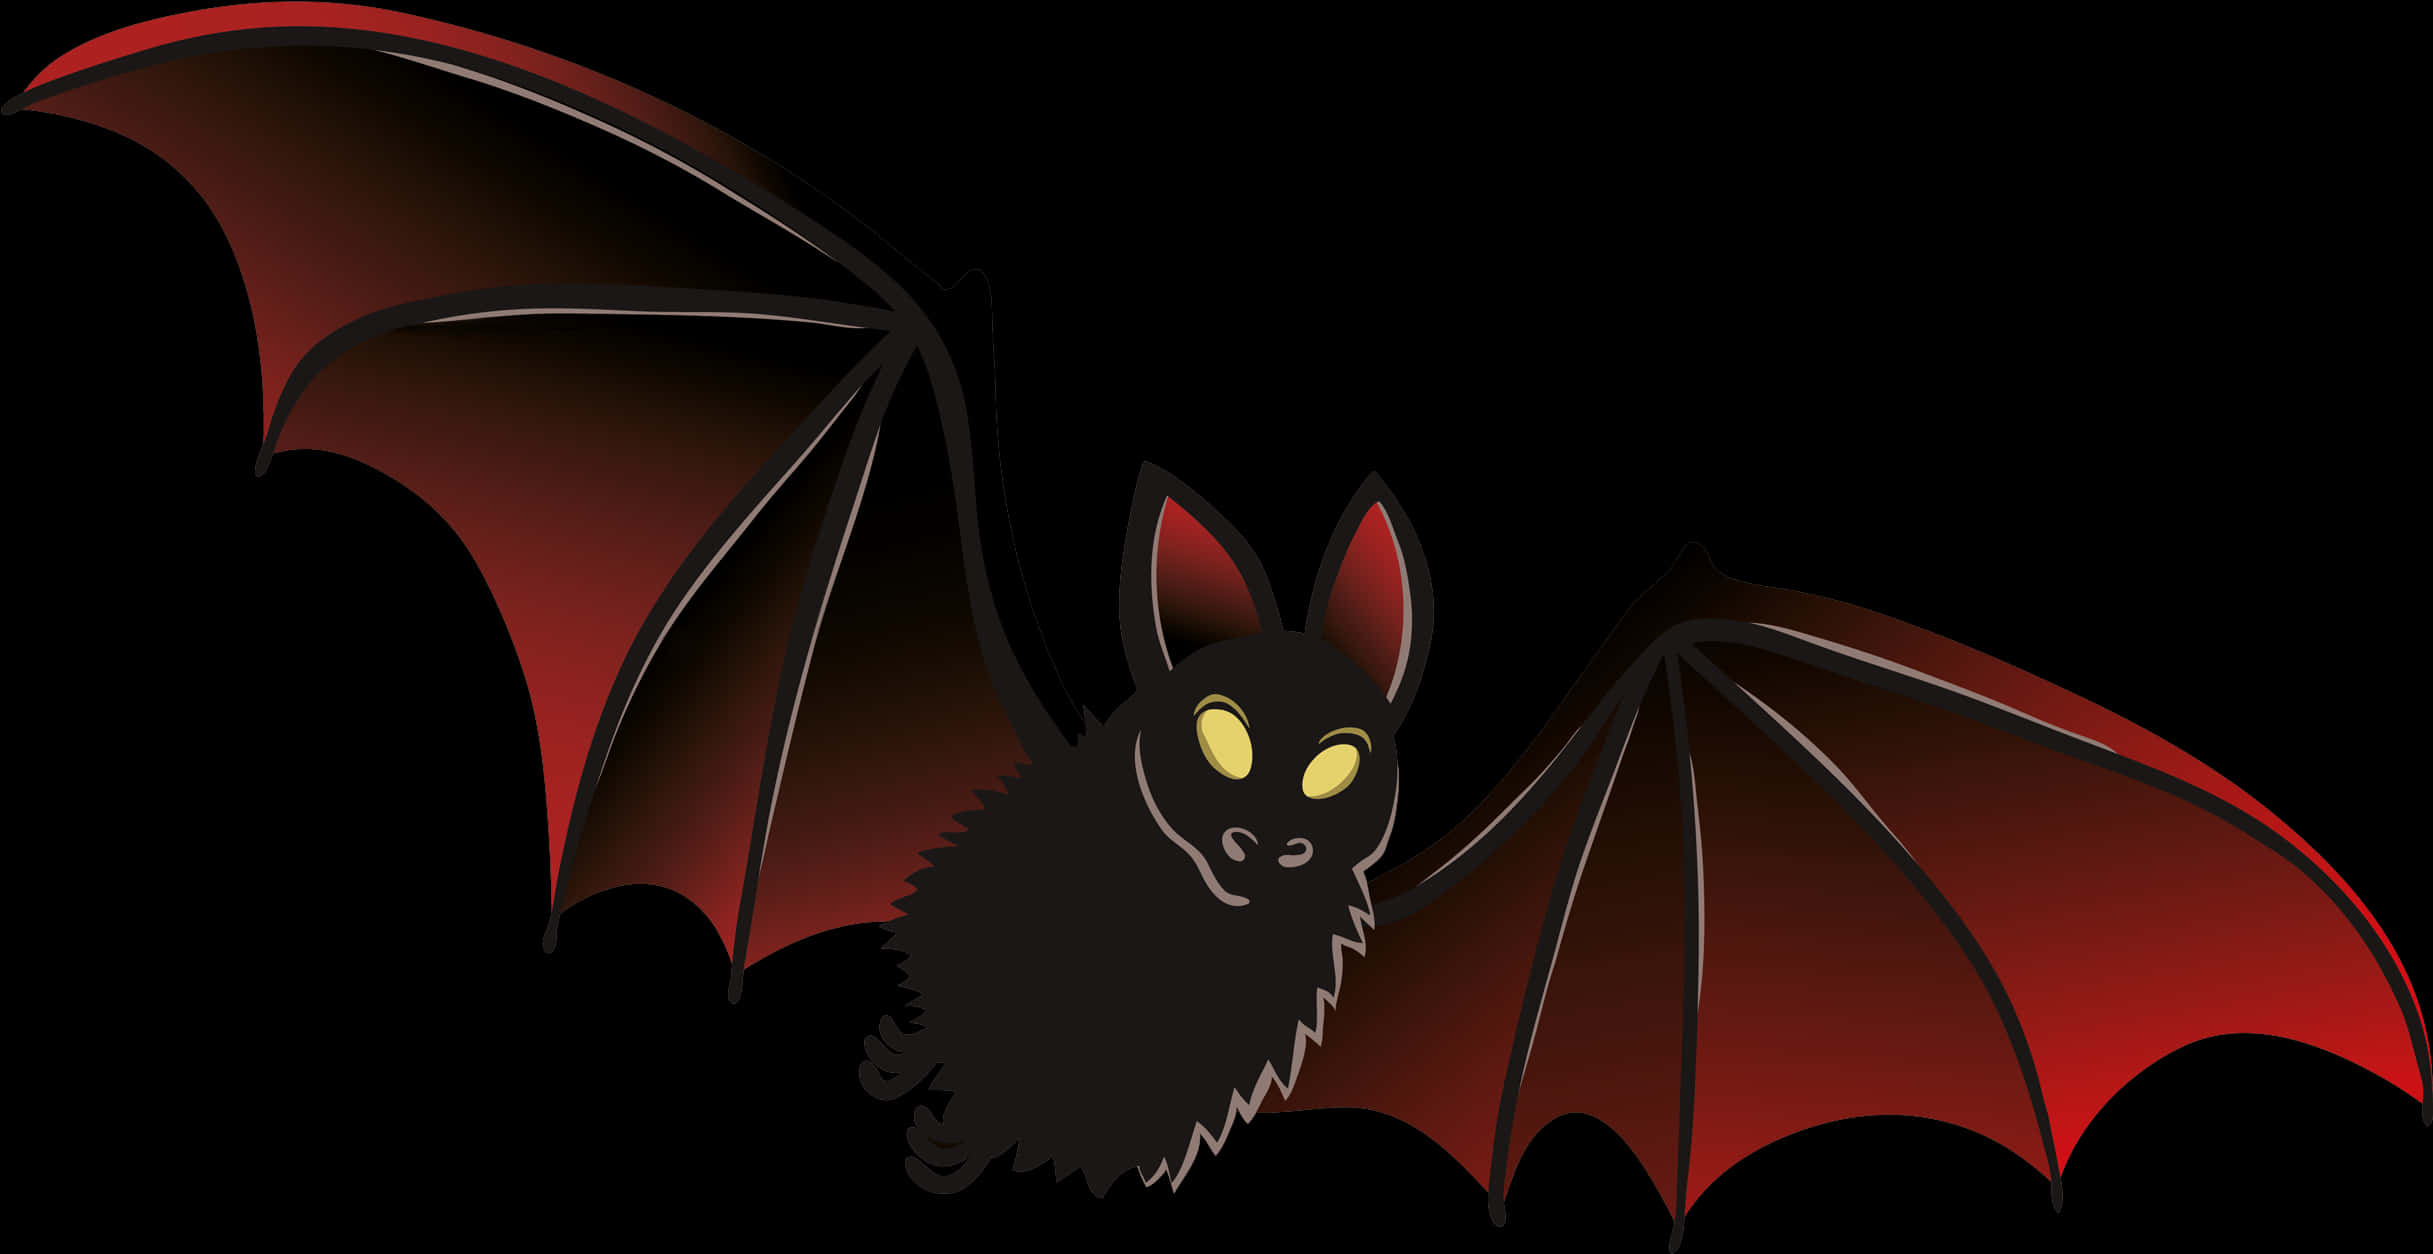 A Bat With Wings And Glowing Eyes